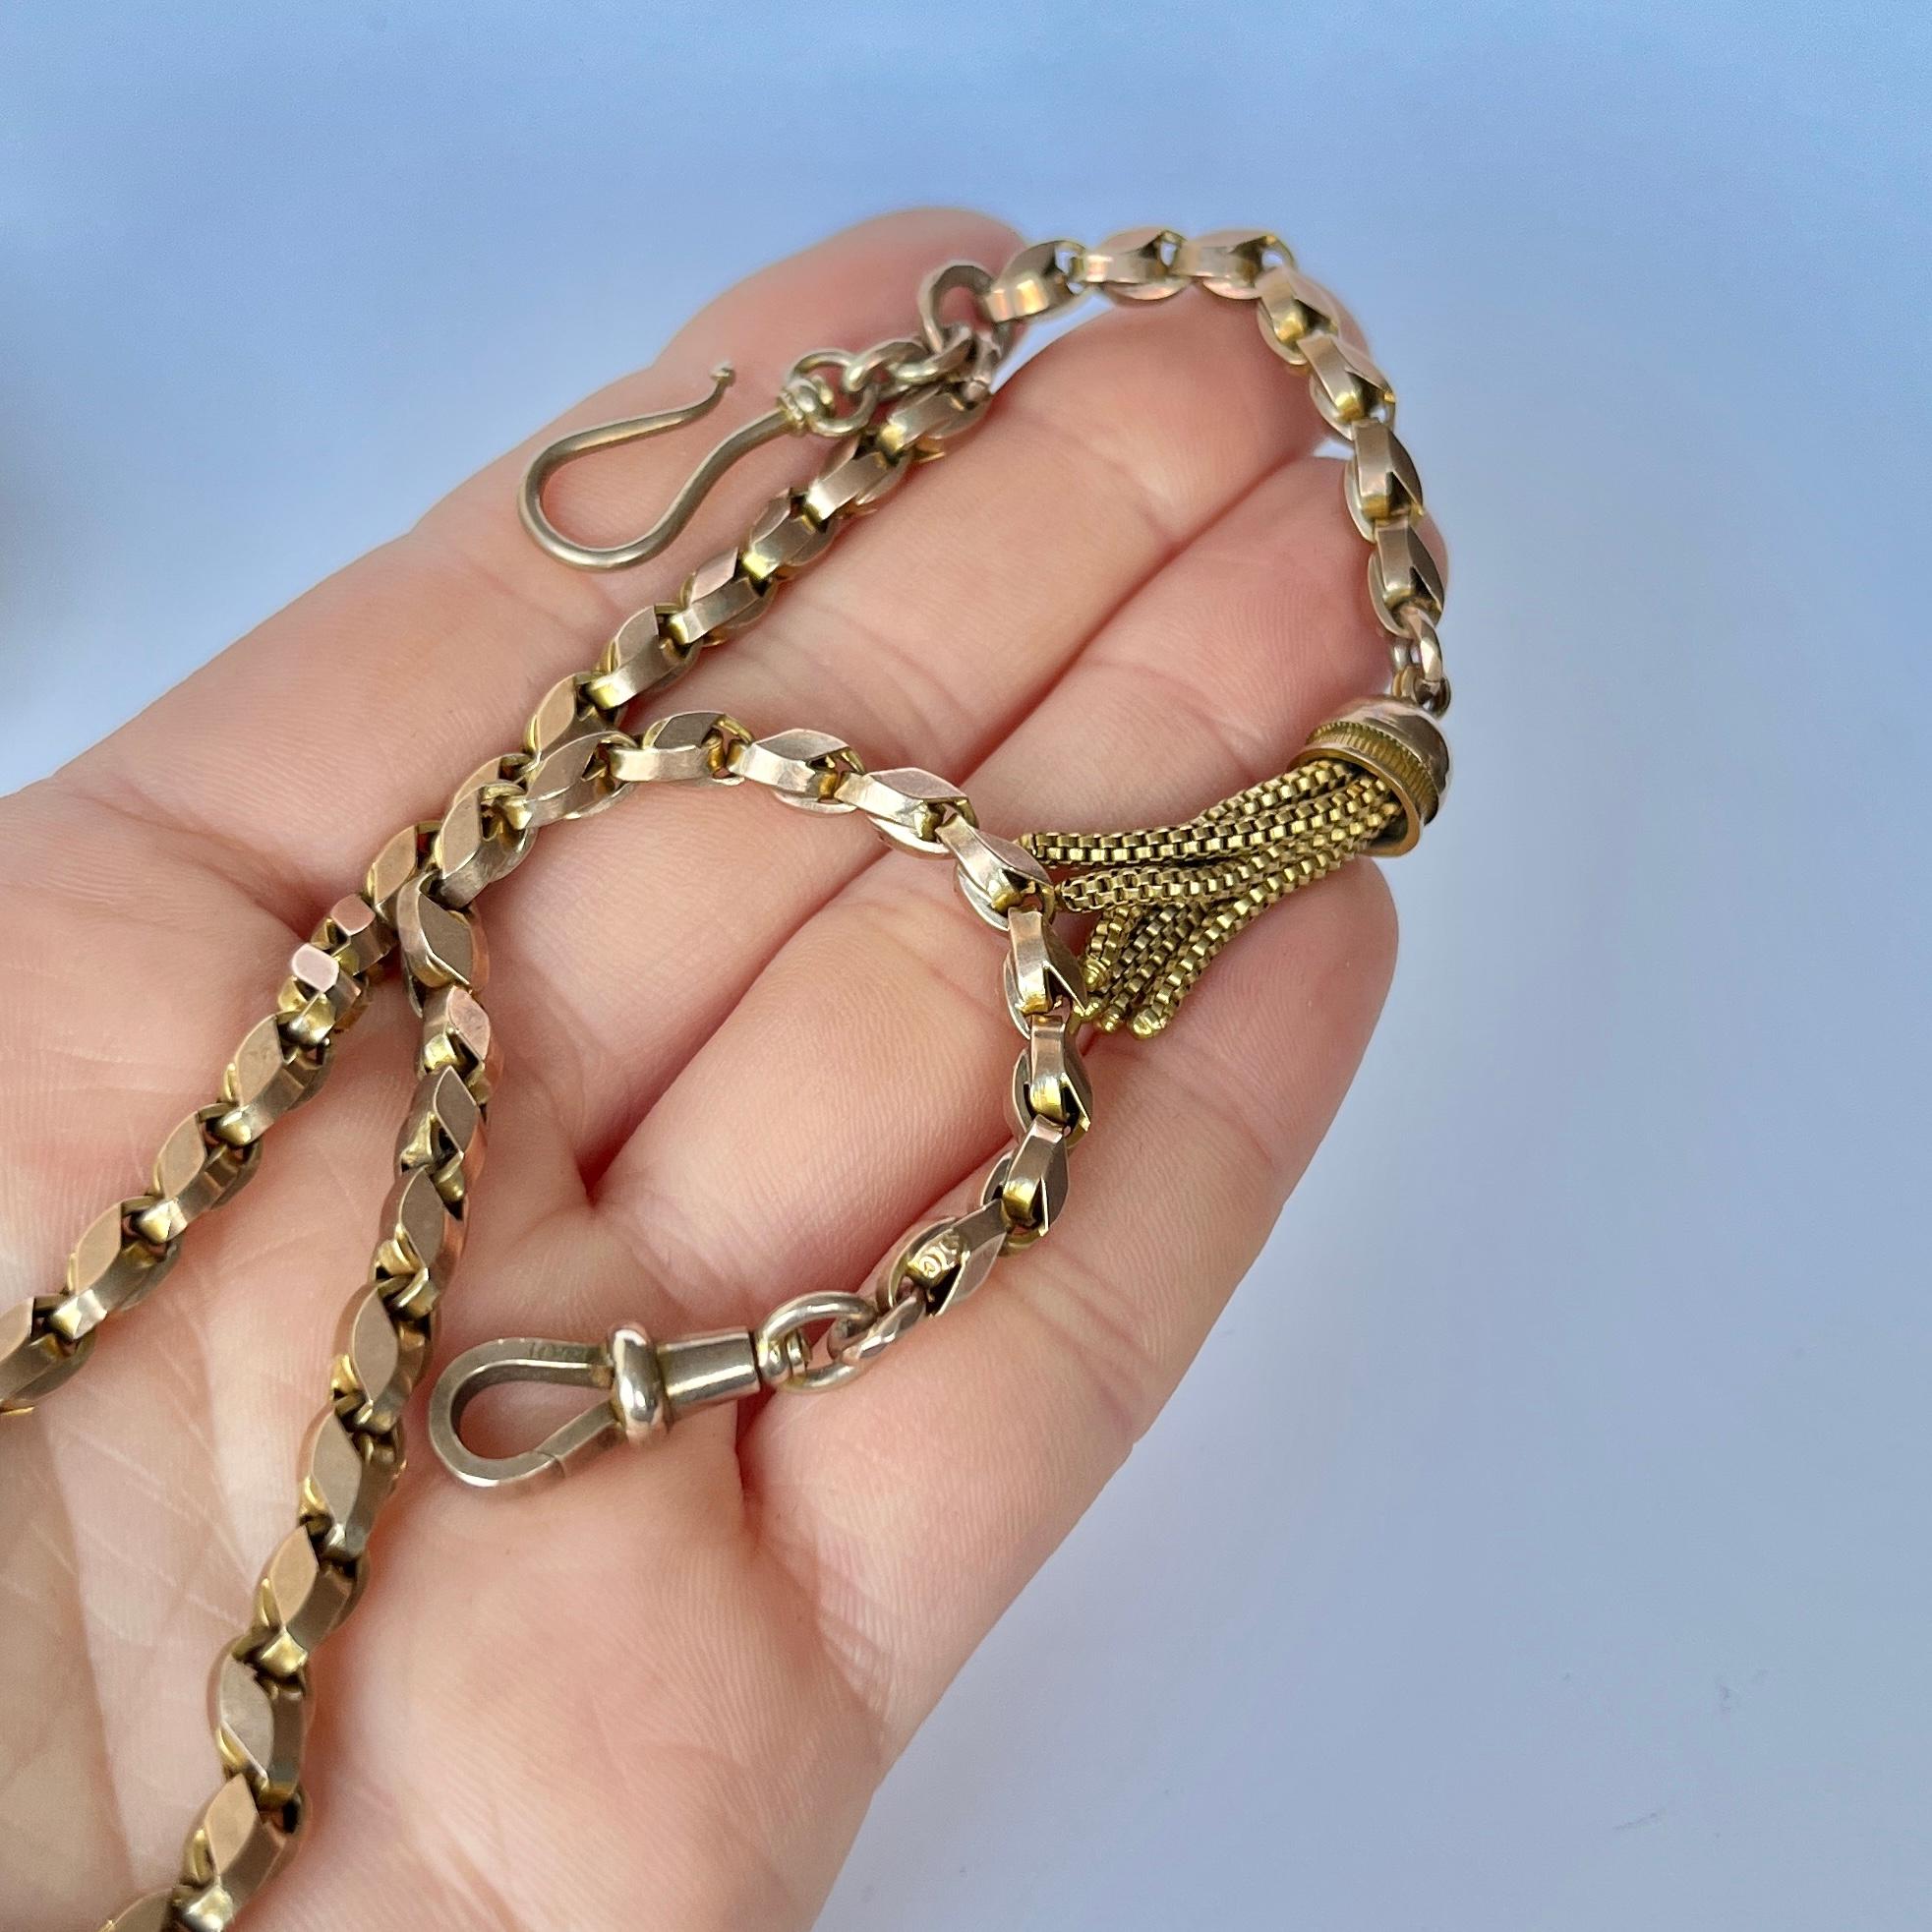 Modelled in 9ct gold, this Albertina boasts so much detail! To start off with it has a dog clip to fasten which then takes you down to a decorative link and ends with a tassel with a hook charm. 

Length from clasp to end: 33cm
Chain Width: 5mm